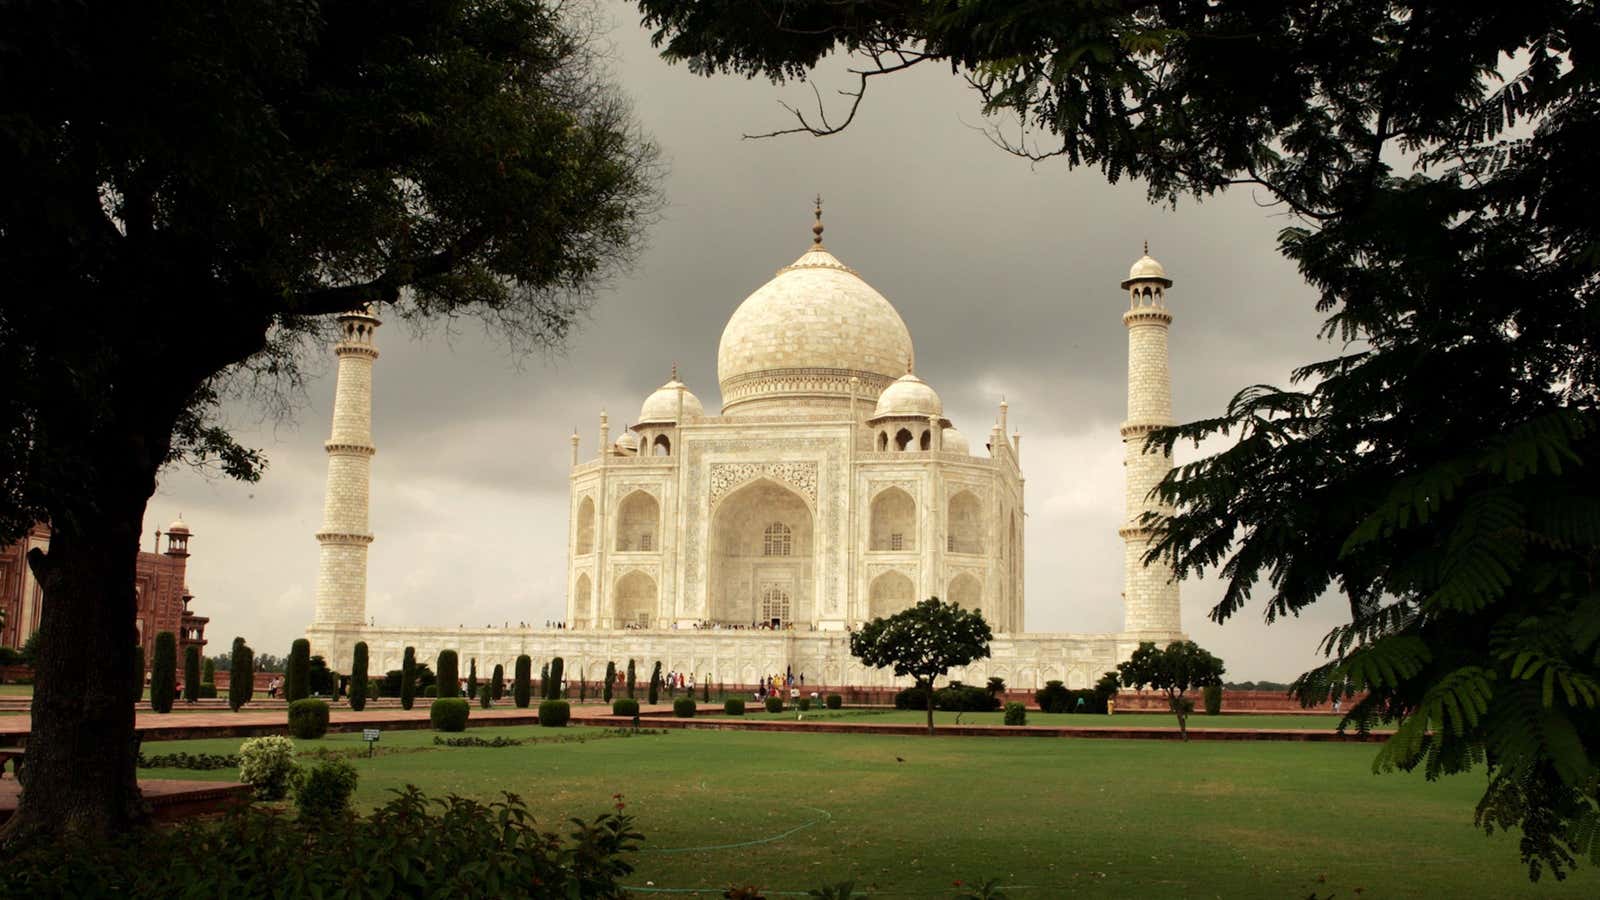 The Taj Mahal is India’s most recognized monument.